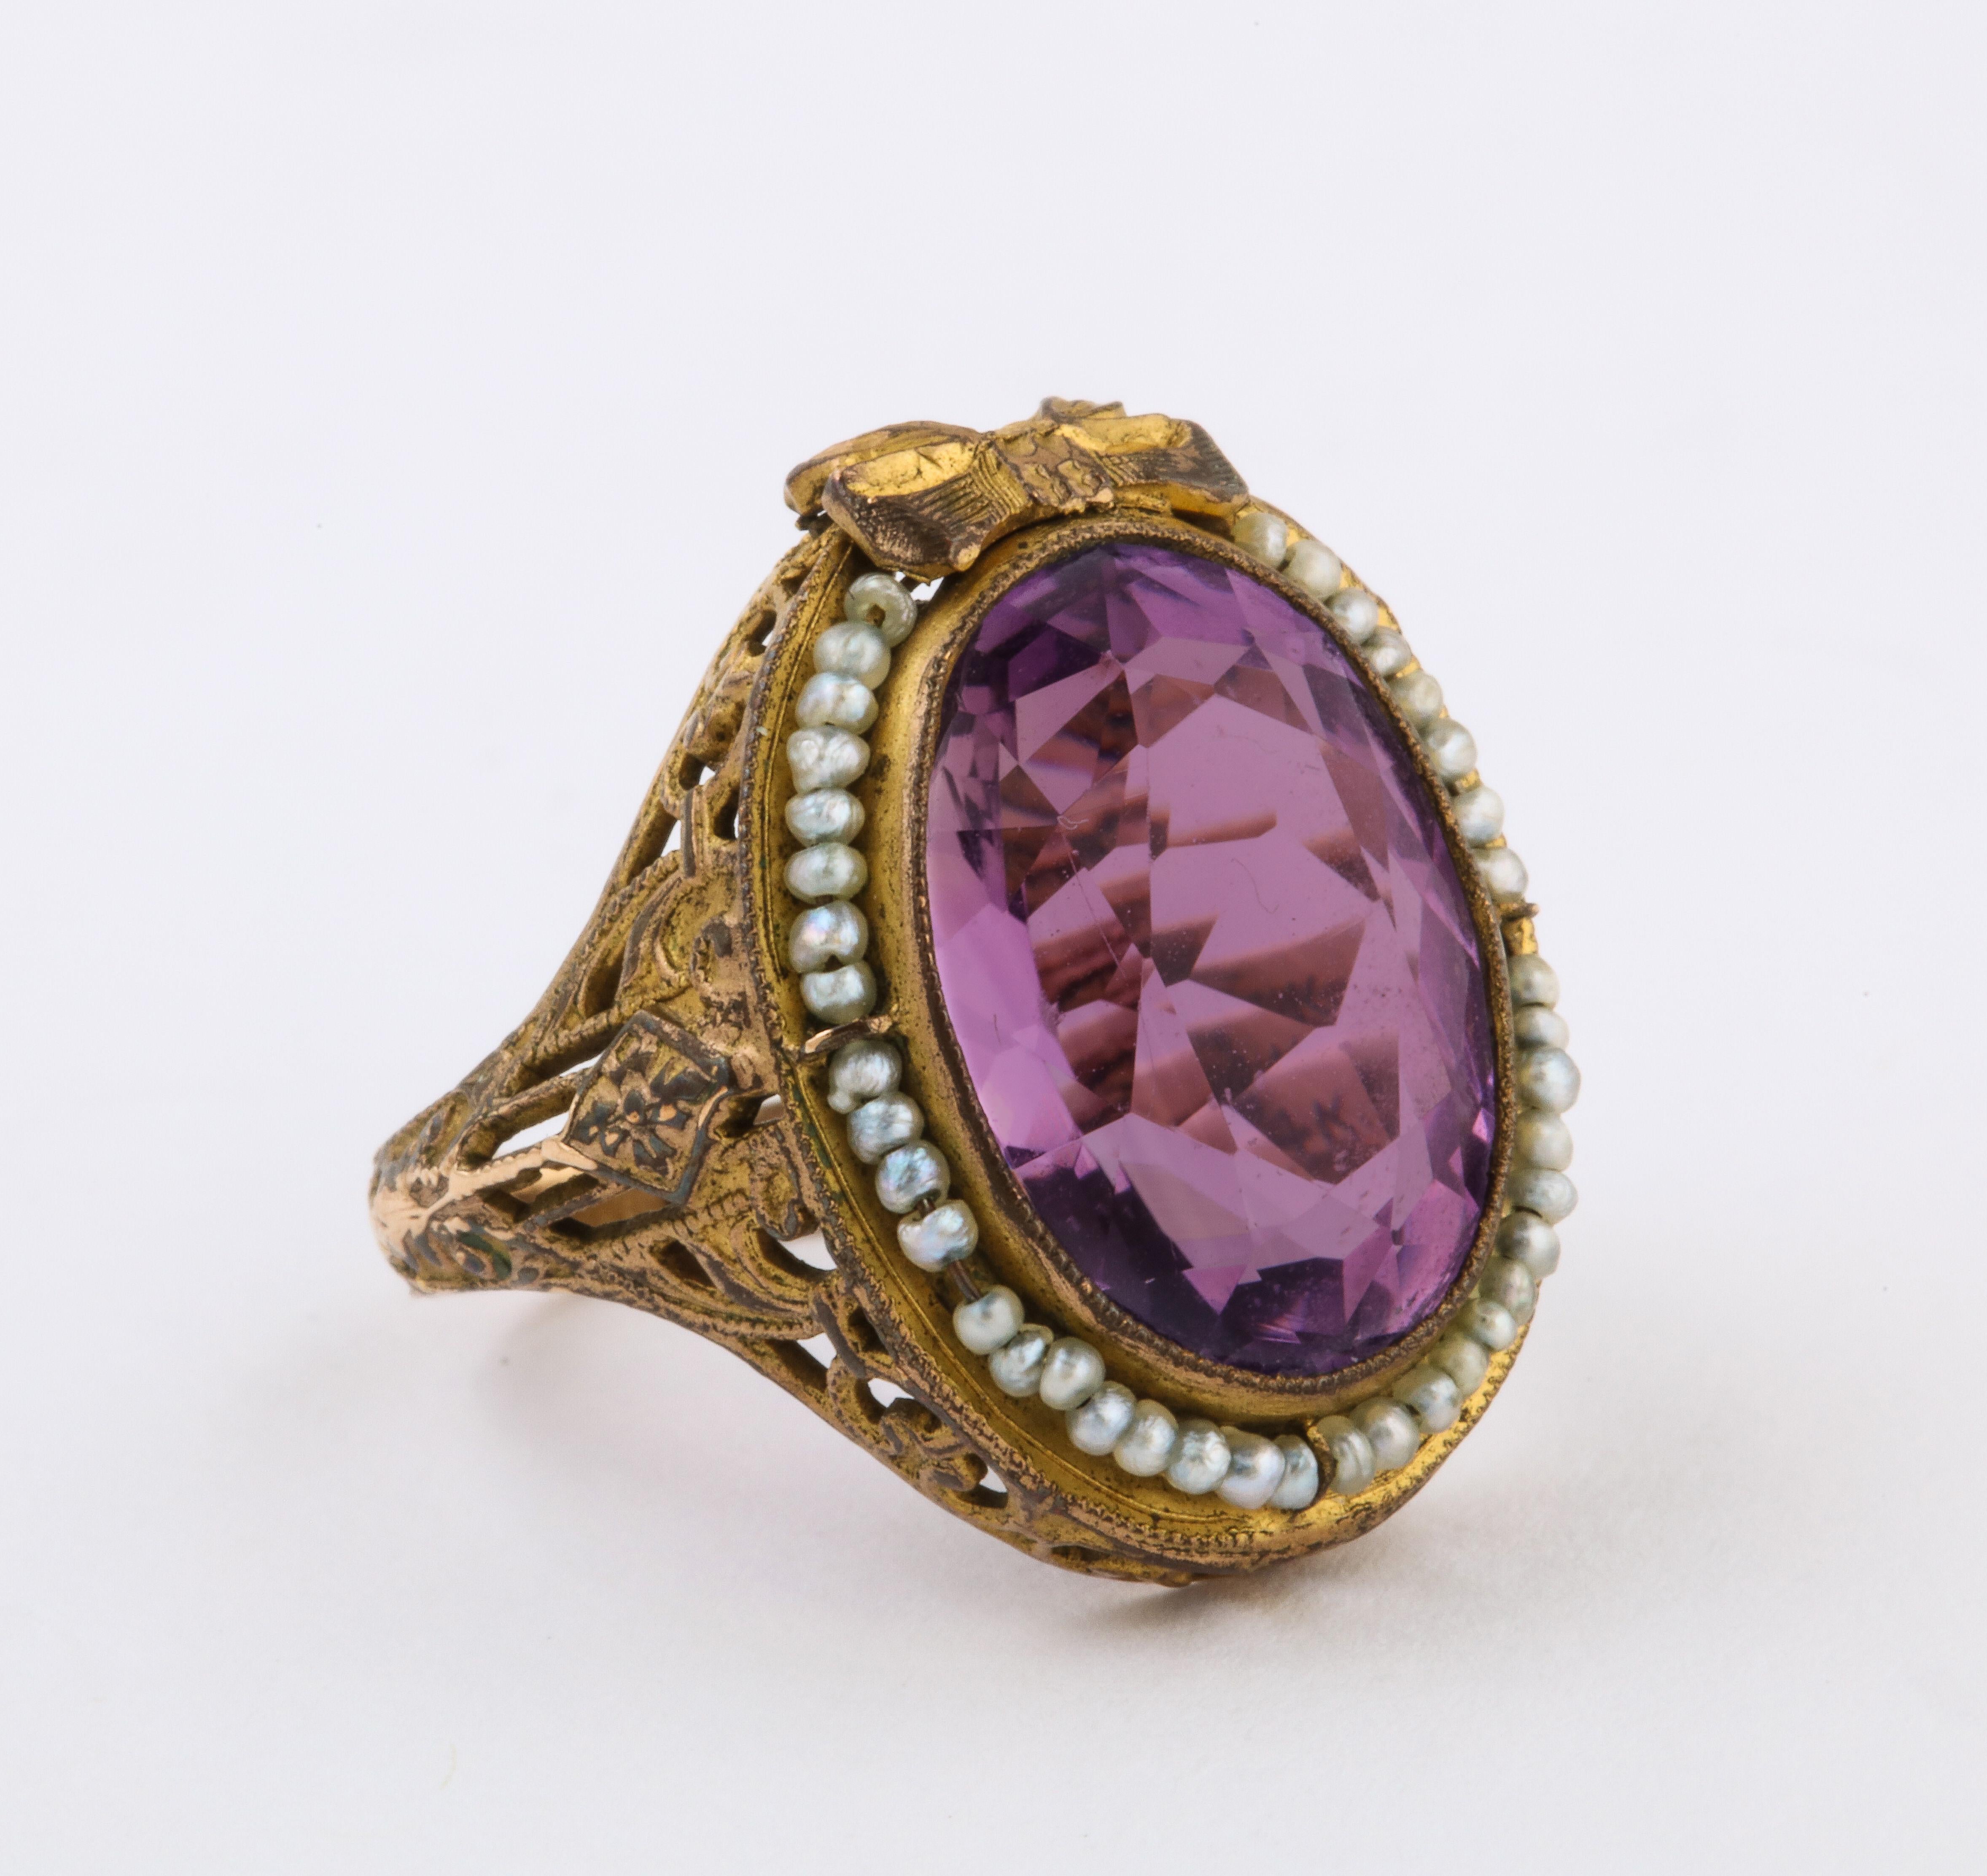 Of regal design set with an oval-cut amethyst of light purple color weighing approximately 6 carats, capped by a bow and surrounded by a border of seed pearls, mounted in an intricate openwork brass and gold setting. 

size  4. Amethyst measures